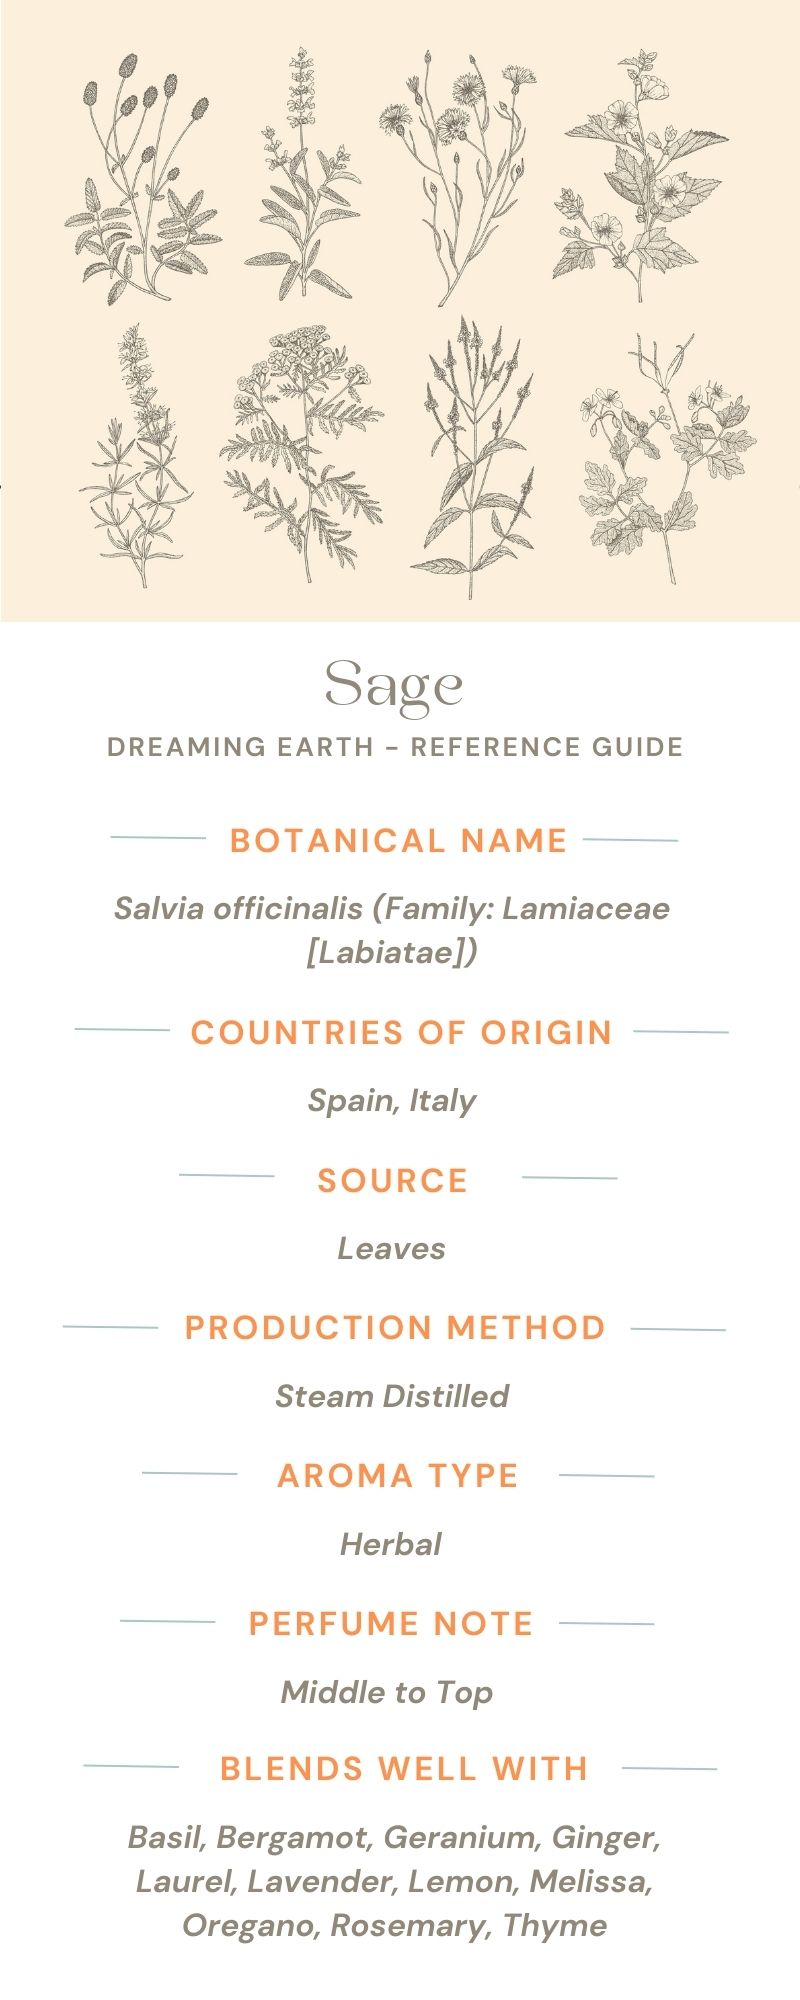 Load image into Gallery viewer, Sage, Organic Essential Oil (Spanish) - Dreaming Earth Inc
